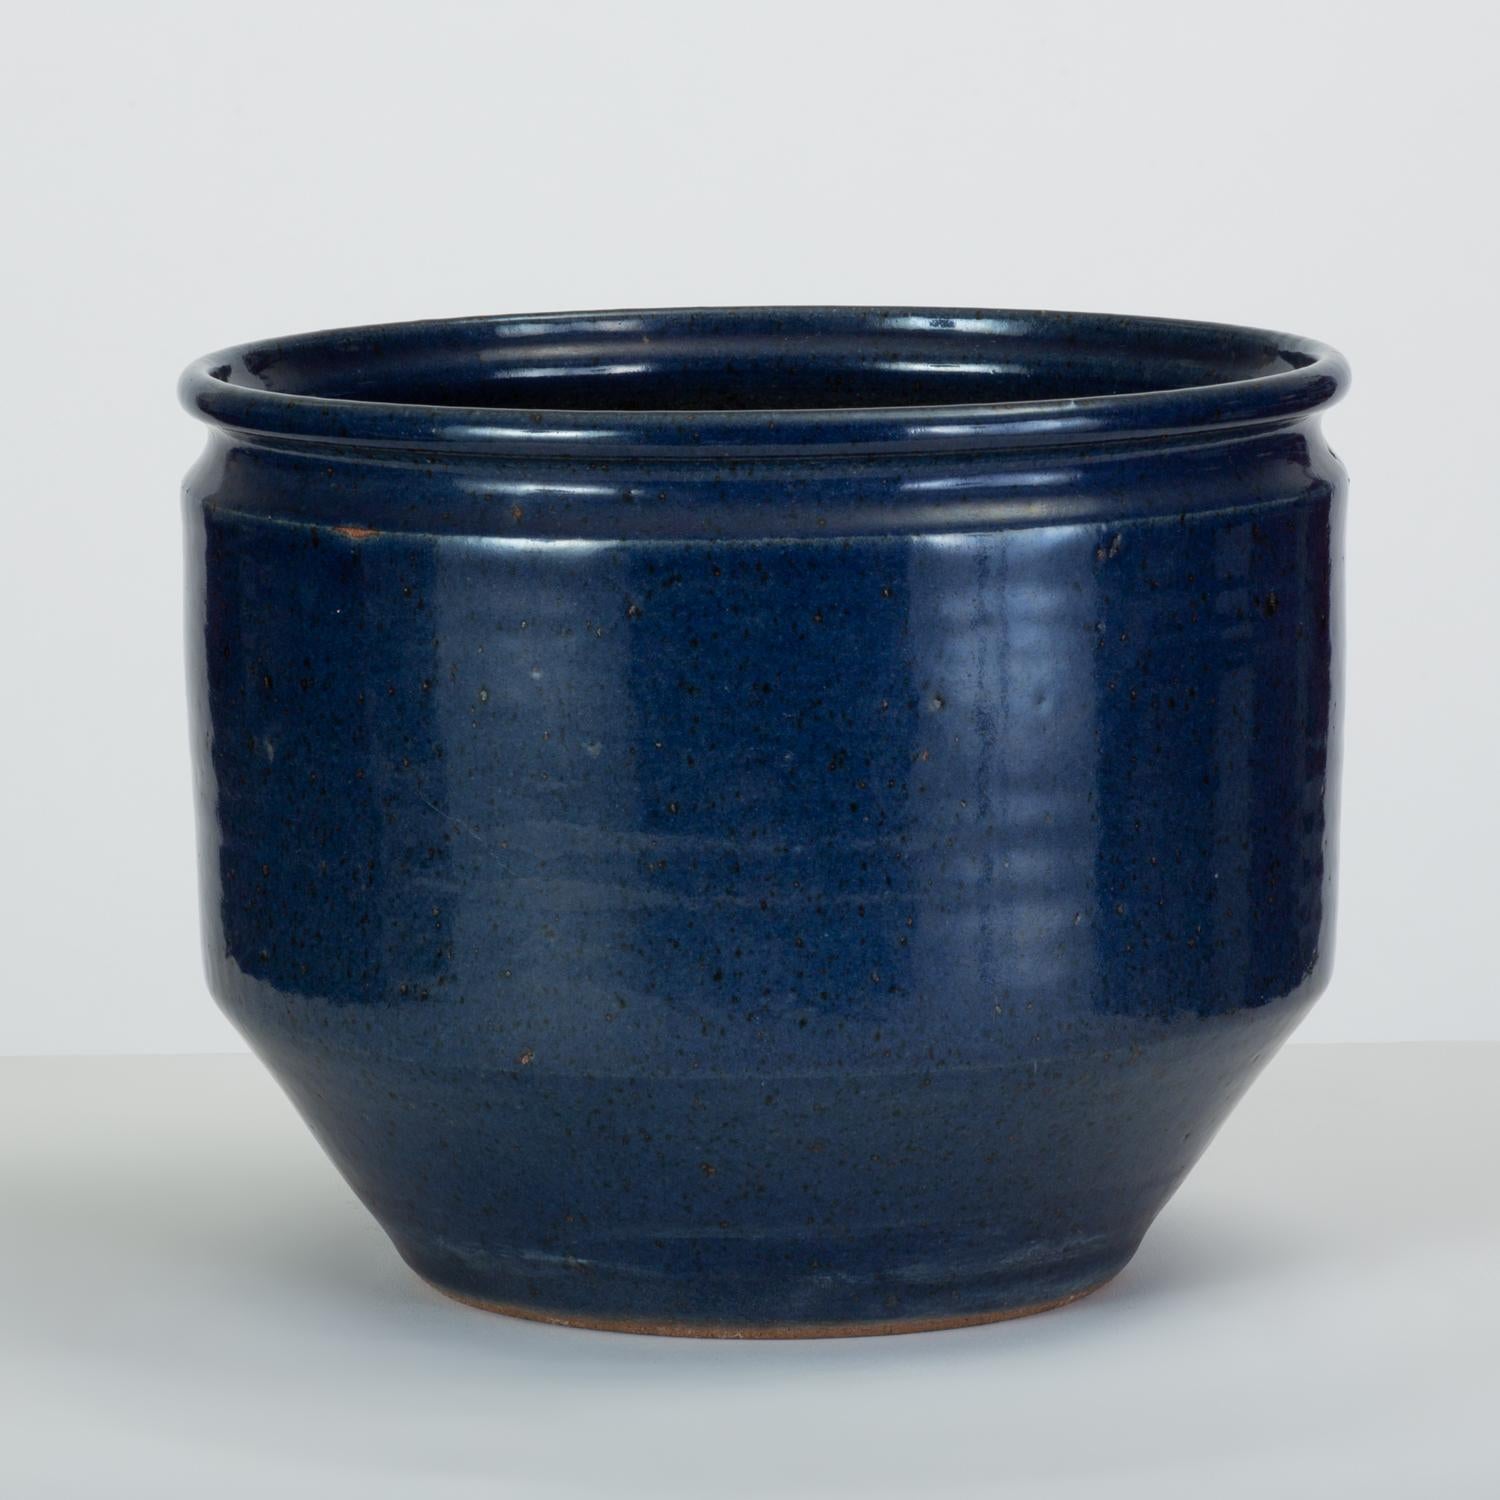 Pair of Blue-Glazed Earthgender Bowl Planters, David Cressey and Robert Maxwell 5